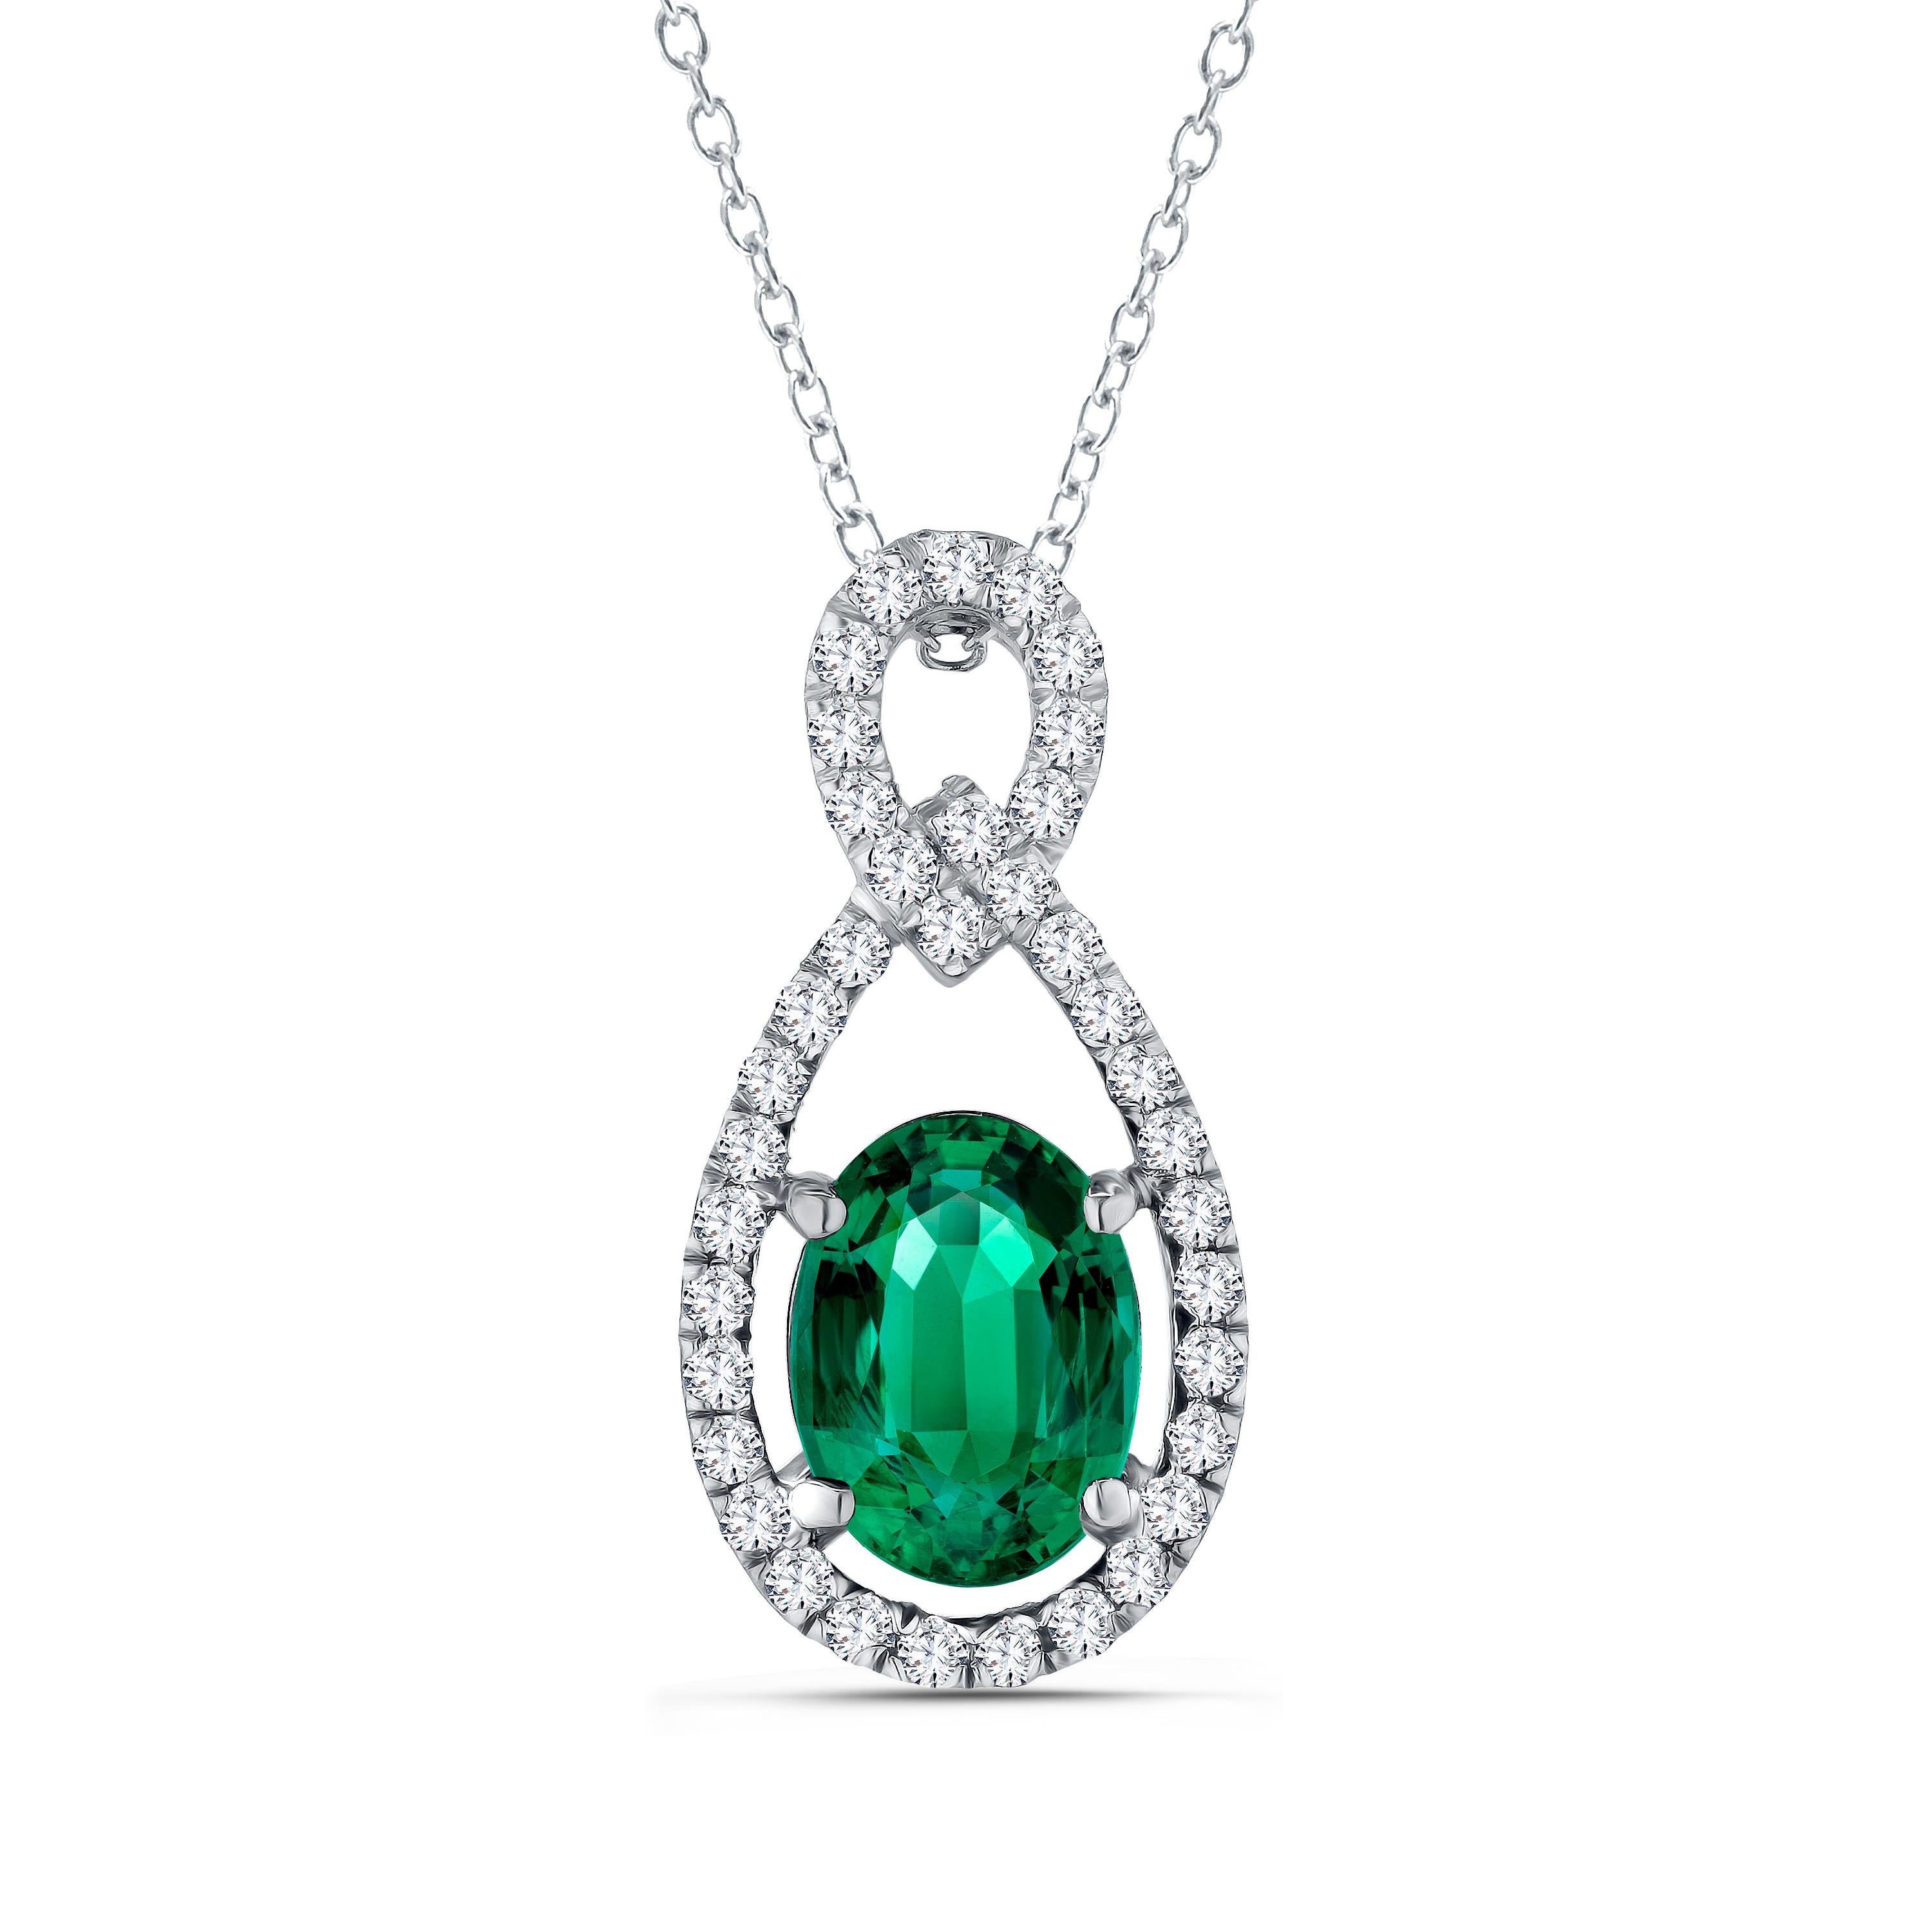 This beautiful pendant has a 1.26 carat oval cut emerald center, inside a halo of round white diamonds, with additional round diamonds on the bail (total diamond weight 0.22 carats). The setting is in 18k White Gold, with 18k Yellow Gold surrounding